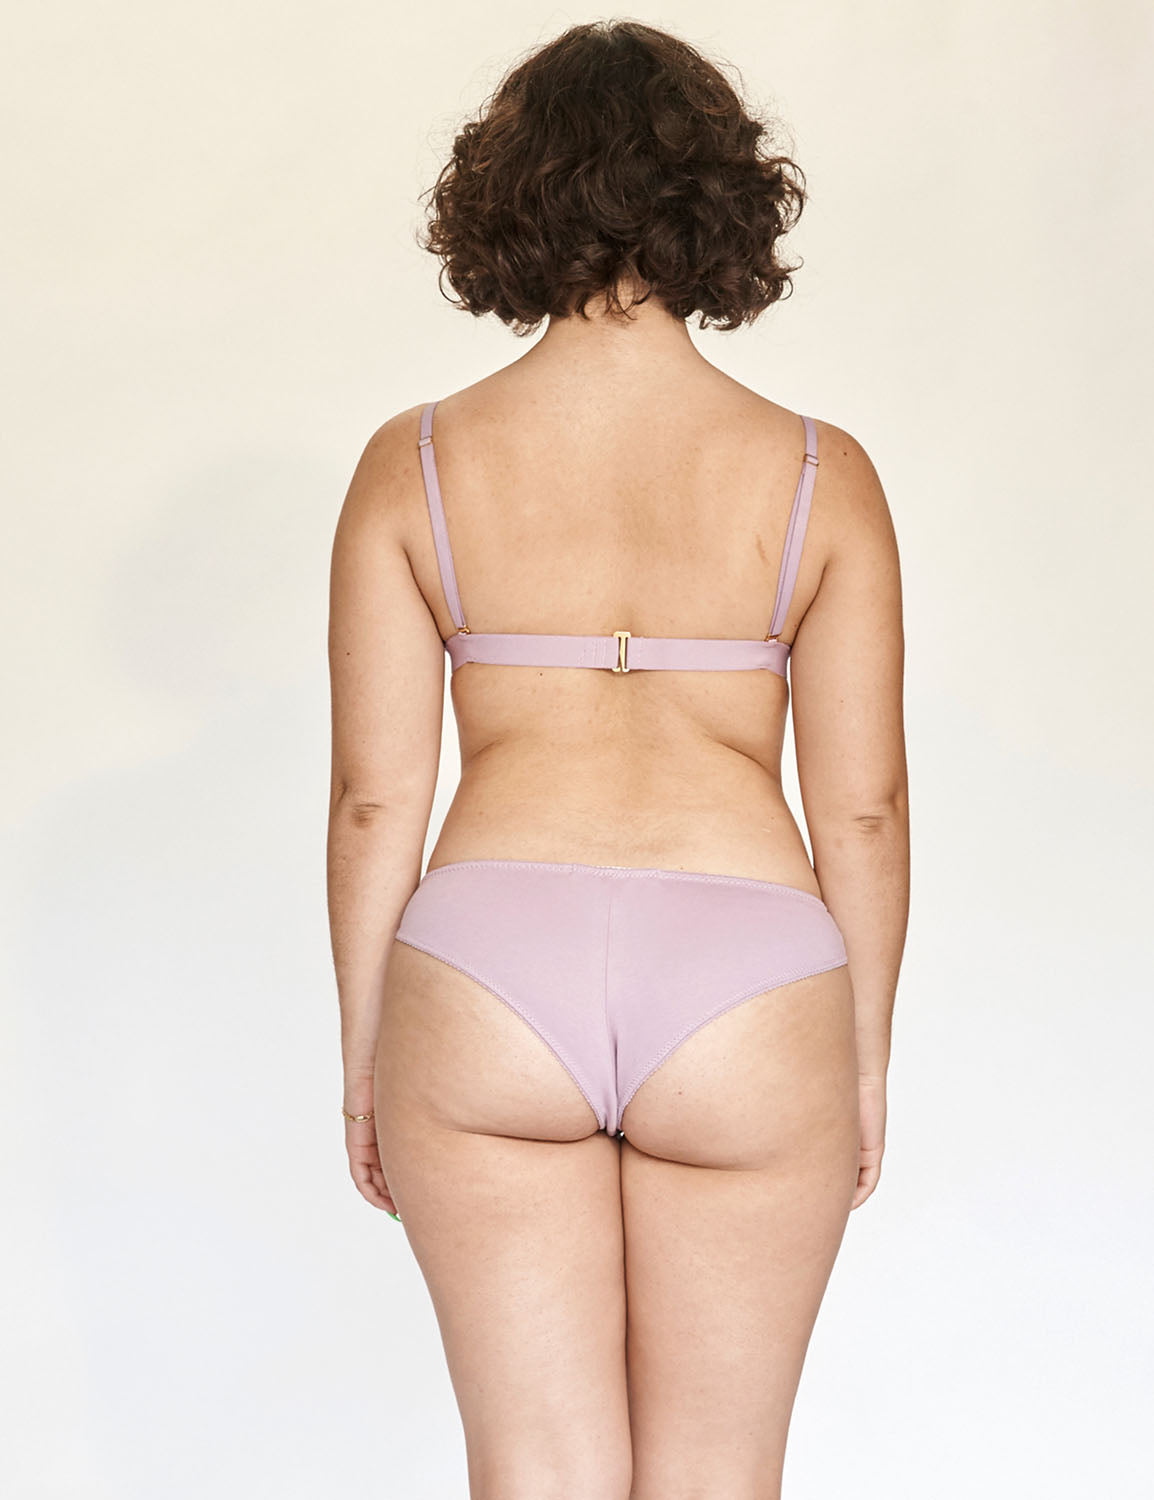 Cheeky organic cotton underwear - Lilac – THE GREAT UNDRESSED